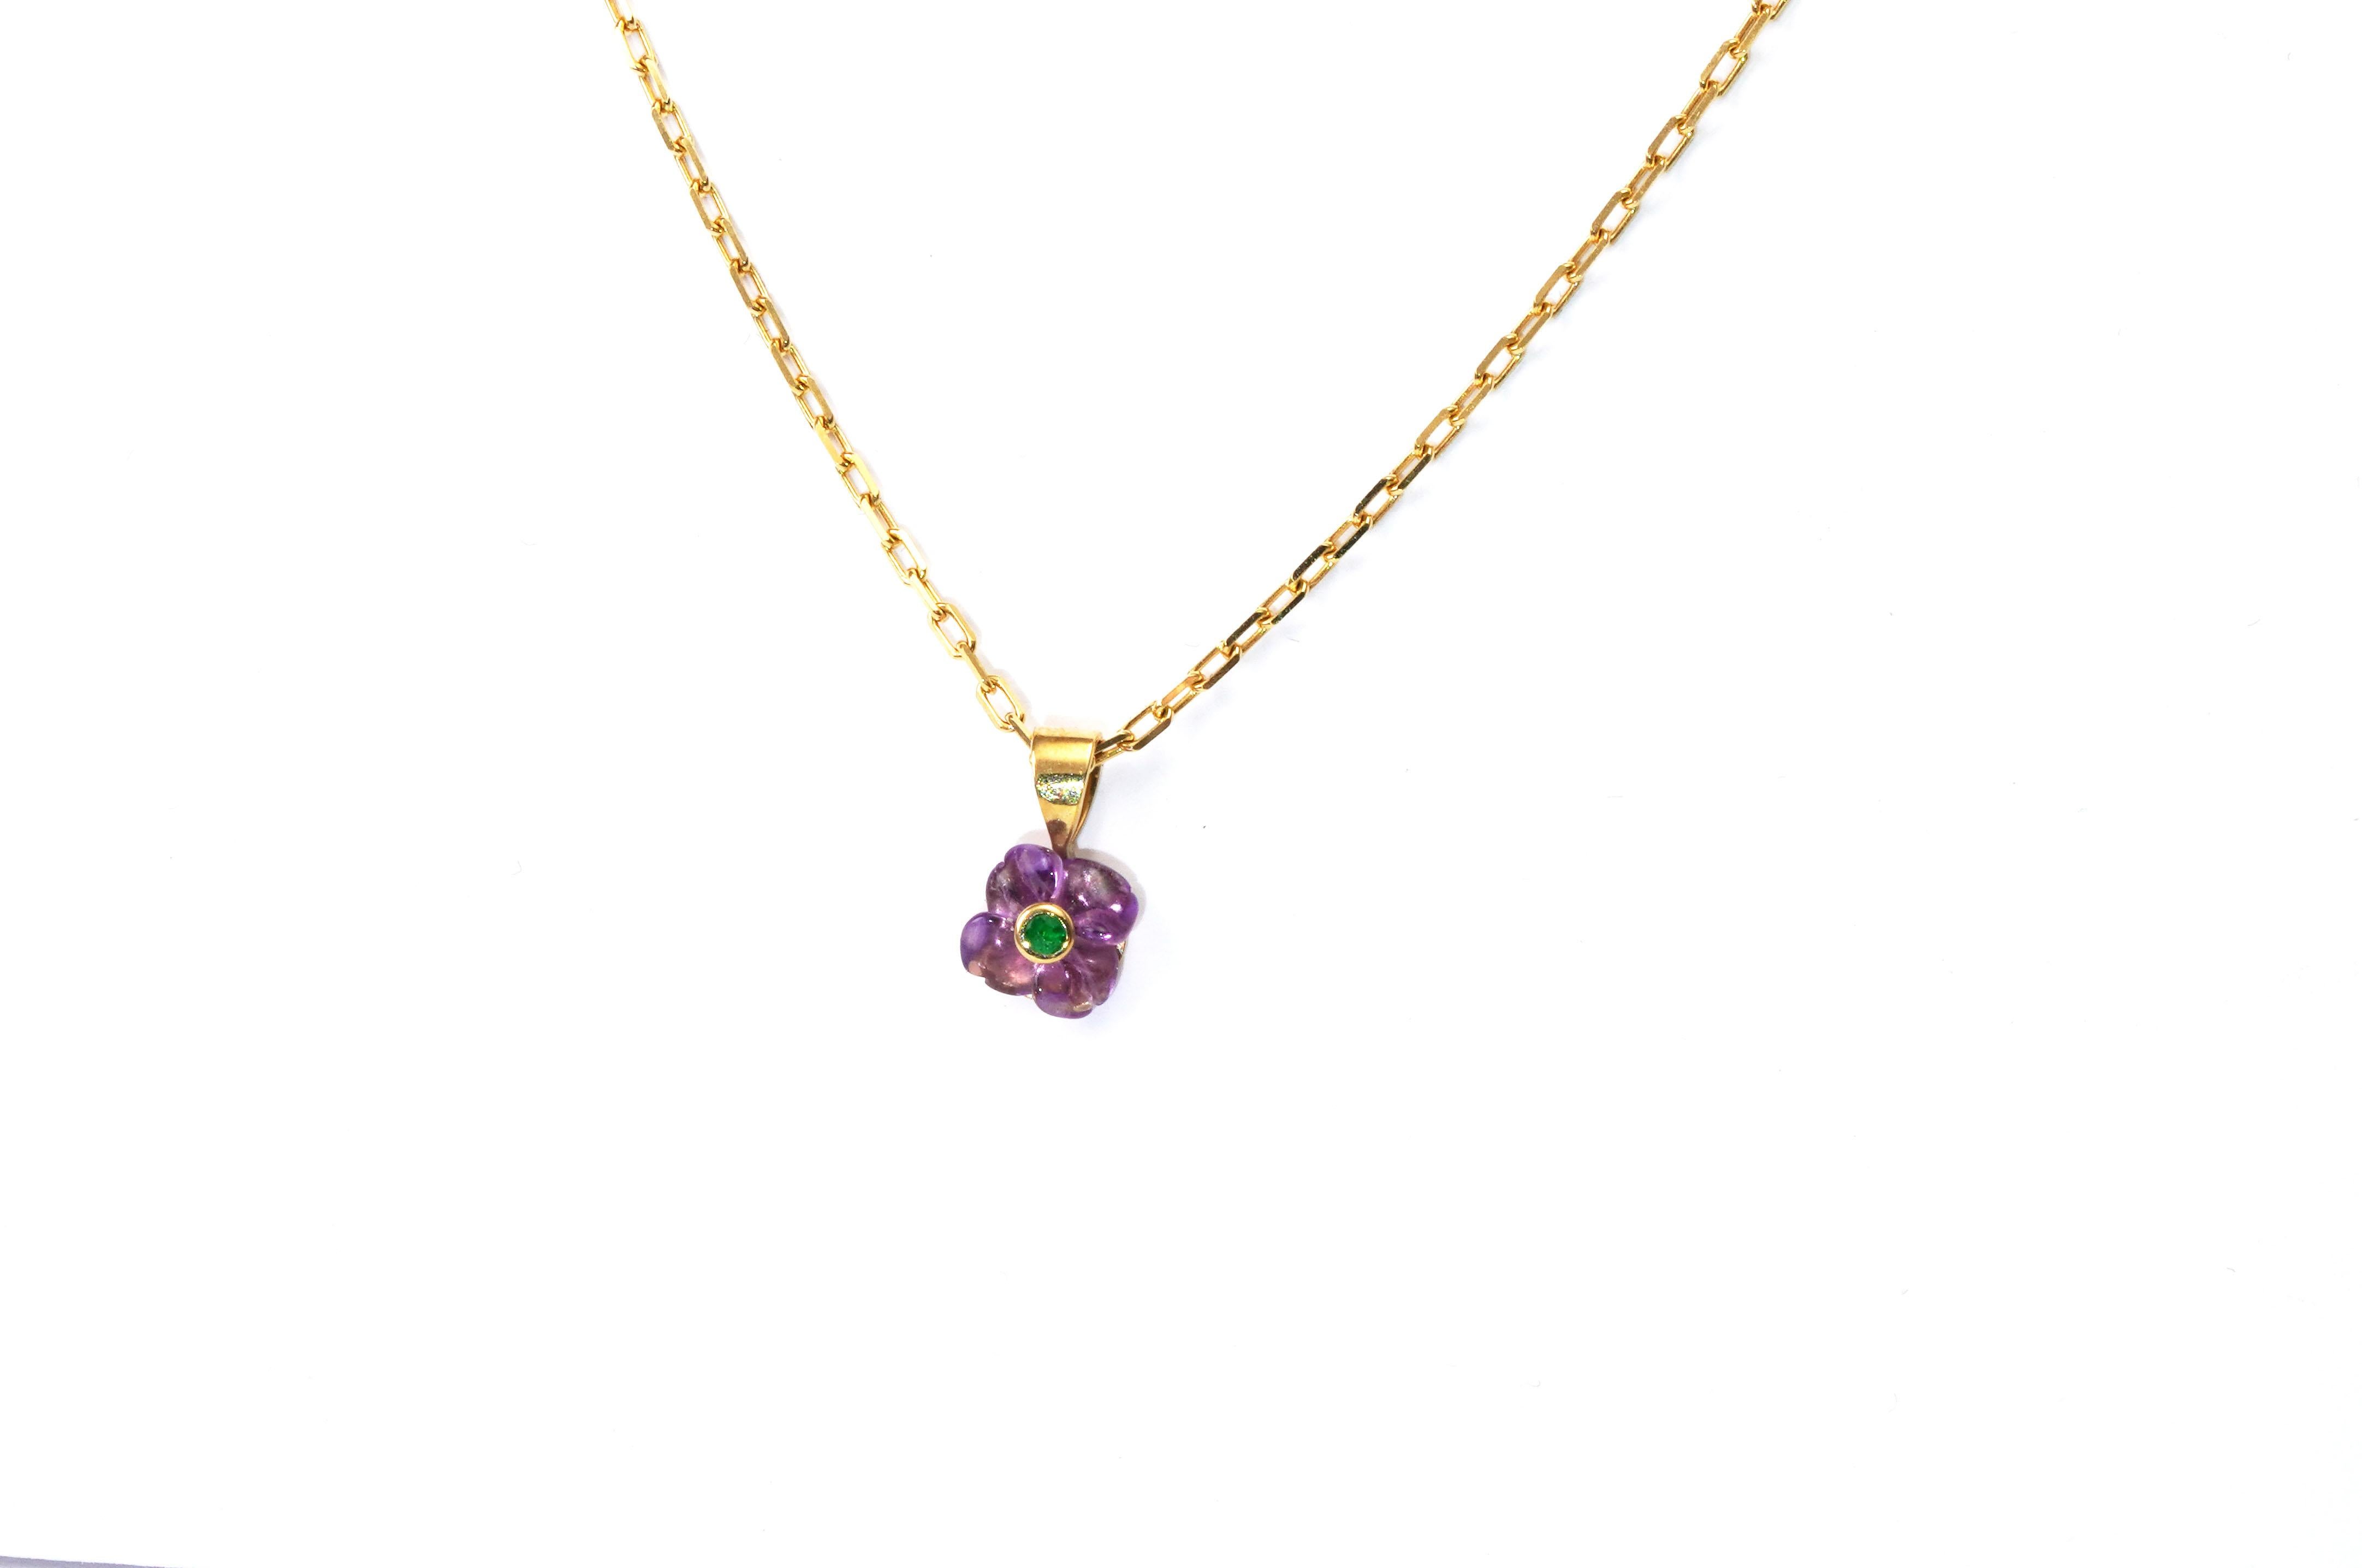 18 kt Gold Necklace with Amethyst and Emerald
Gold color: Yellow
Dimensions: 41 cm Width
Total weight: 2.06 grams

Set with:
- Amethyst
Cut: flower
Color: Purple

- Emerald
Cut: Emerald
Color: Green